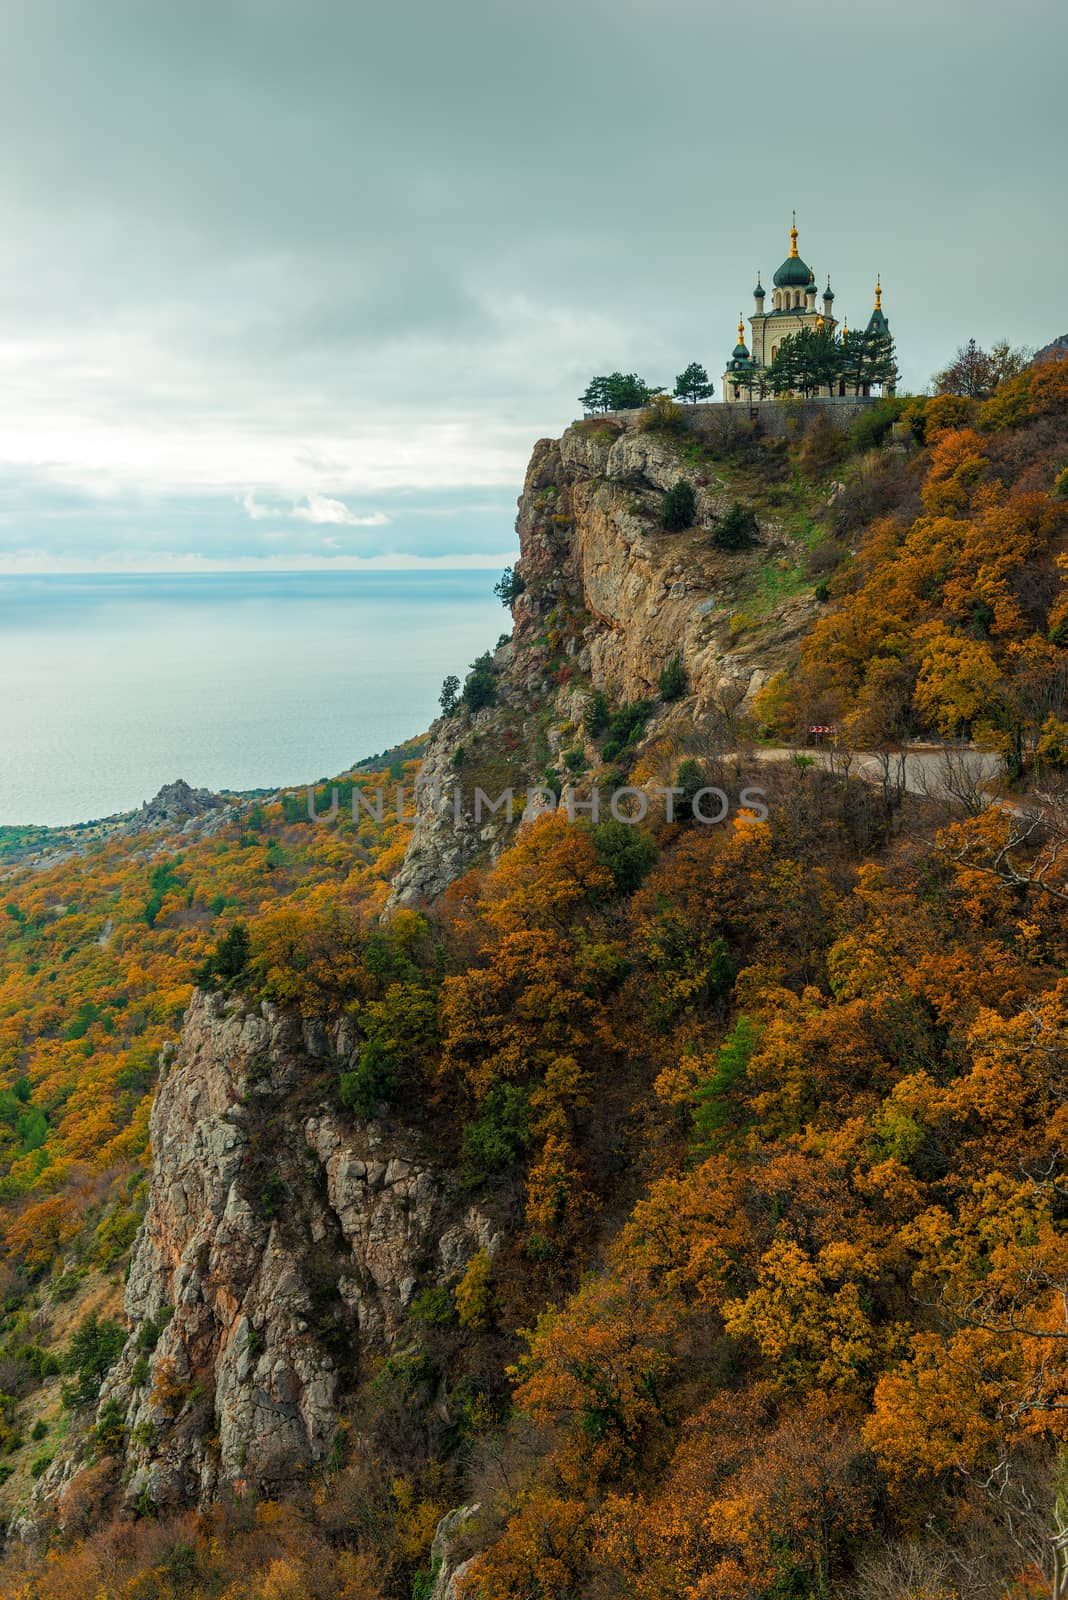 Autumn landscape, view of Foros church in Crimea against the bac by kosmsos111